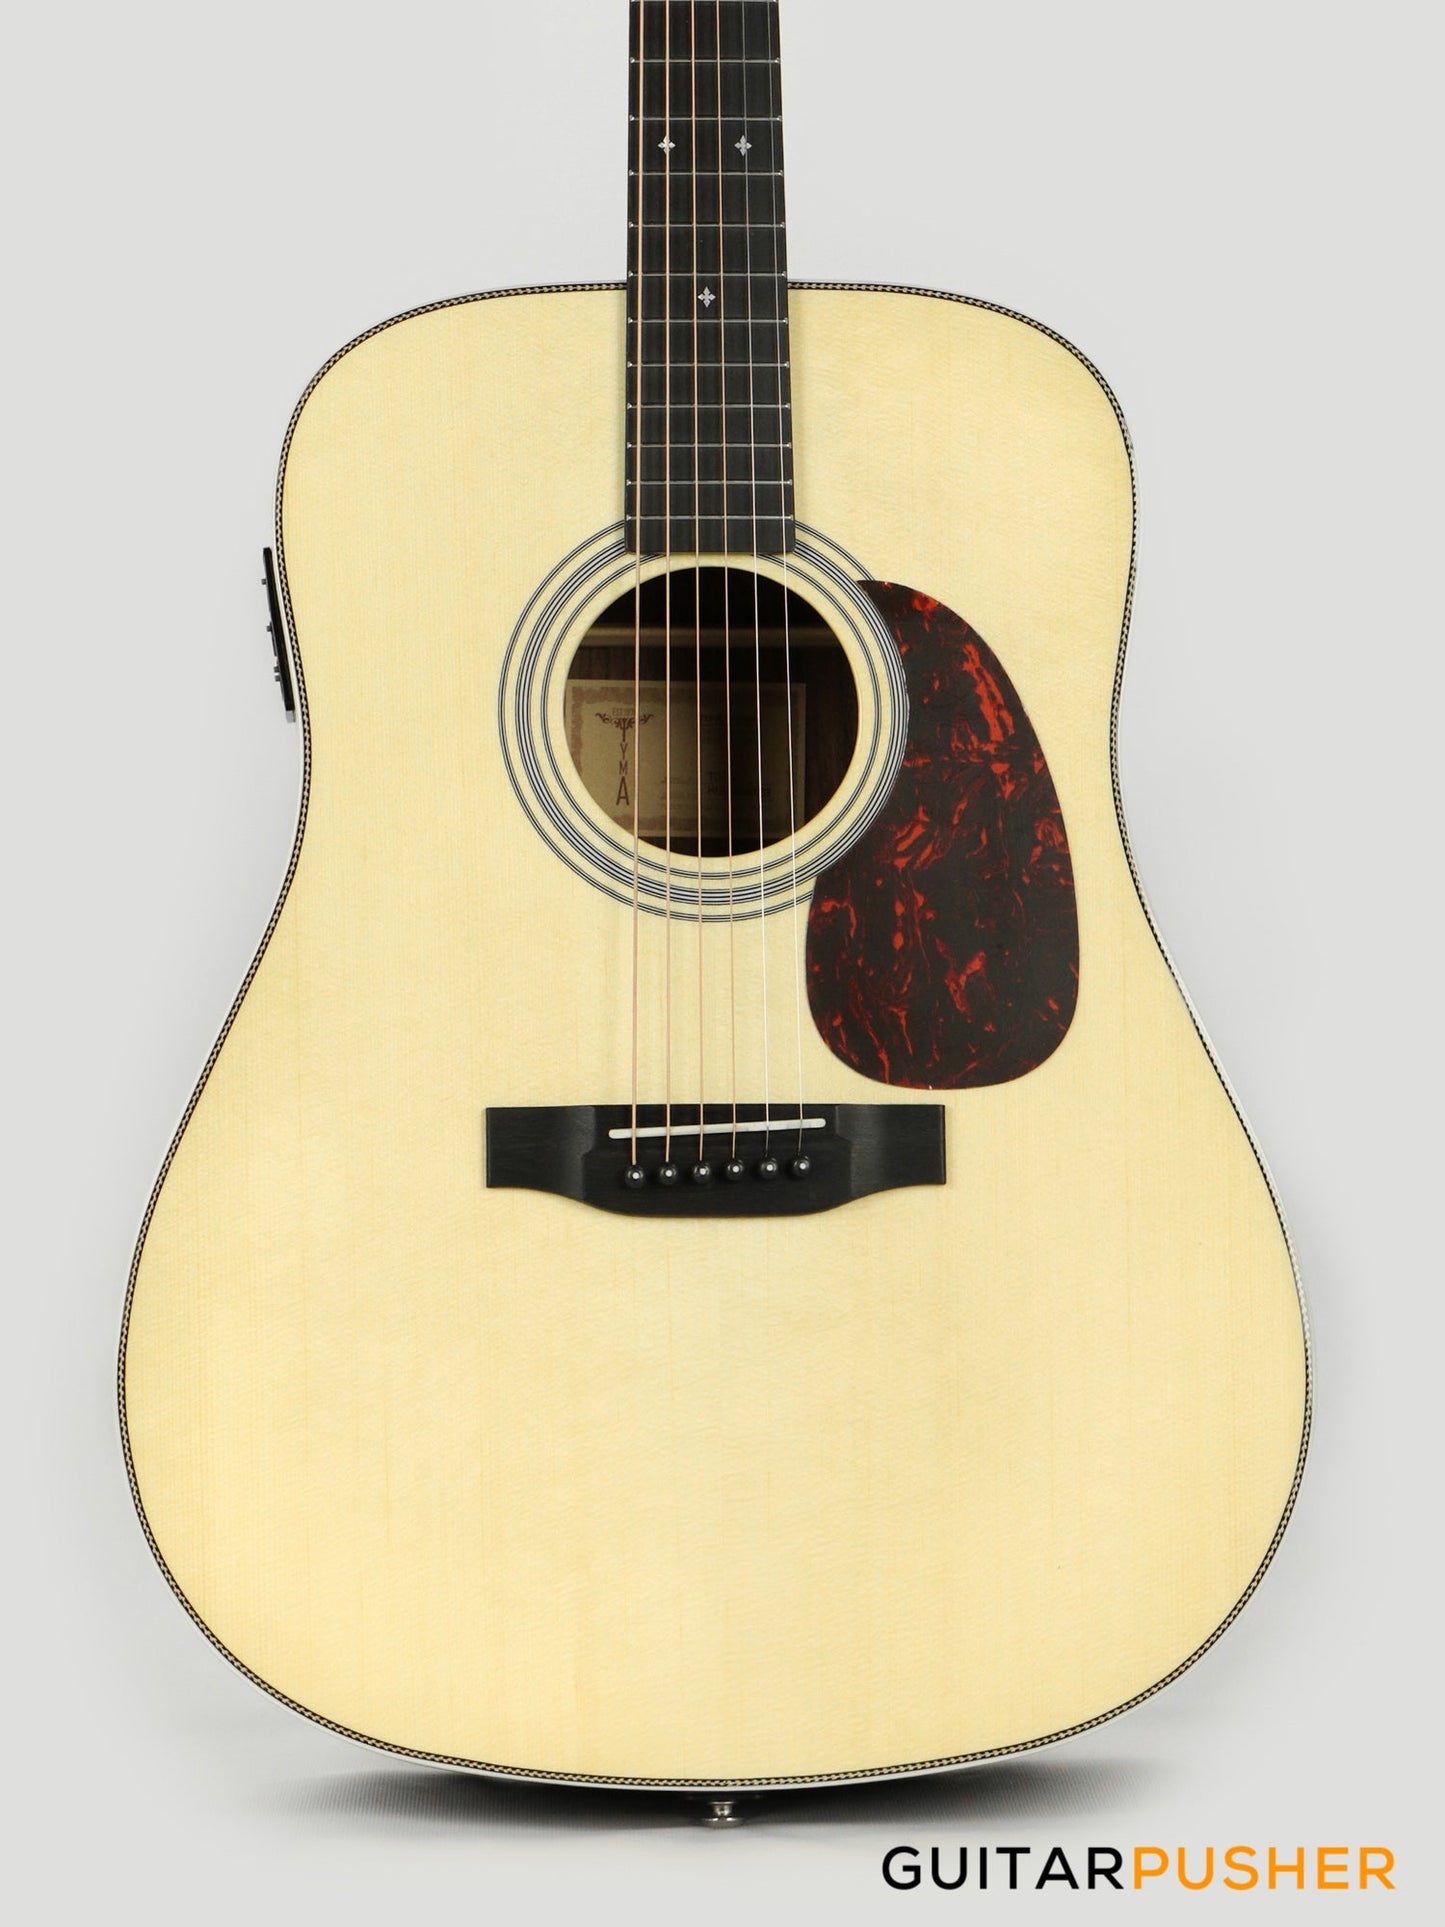 Tyma TD-12E Solid Sitka Spruce Top Rosewood Dreadnought Acoustic-Electric Guitar w/ Fishman INK-300 Pickup System